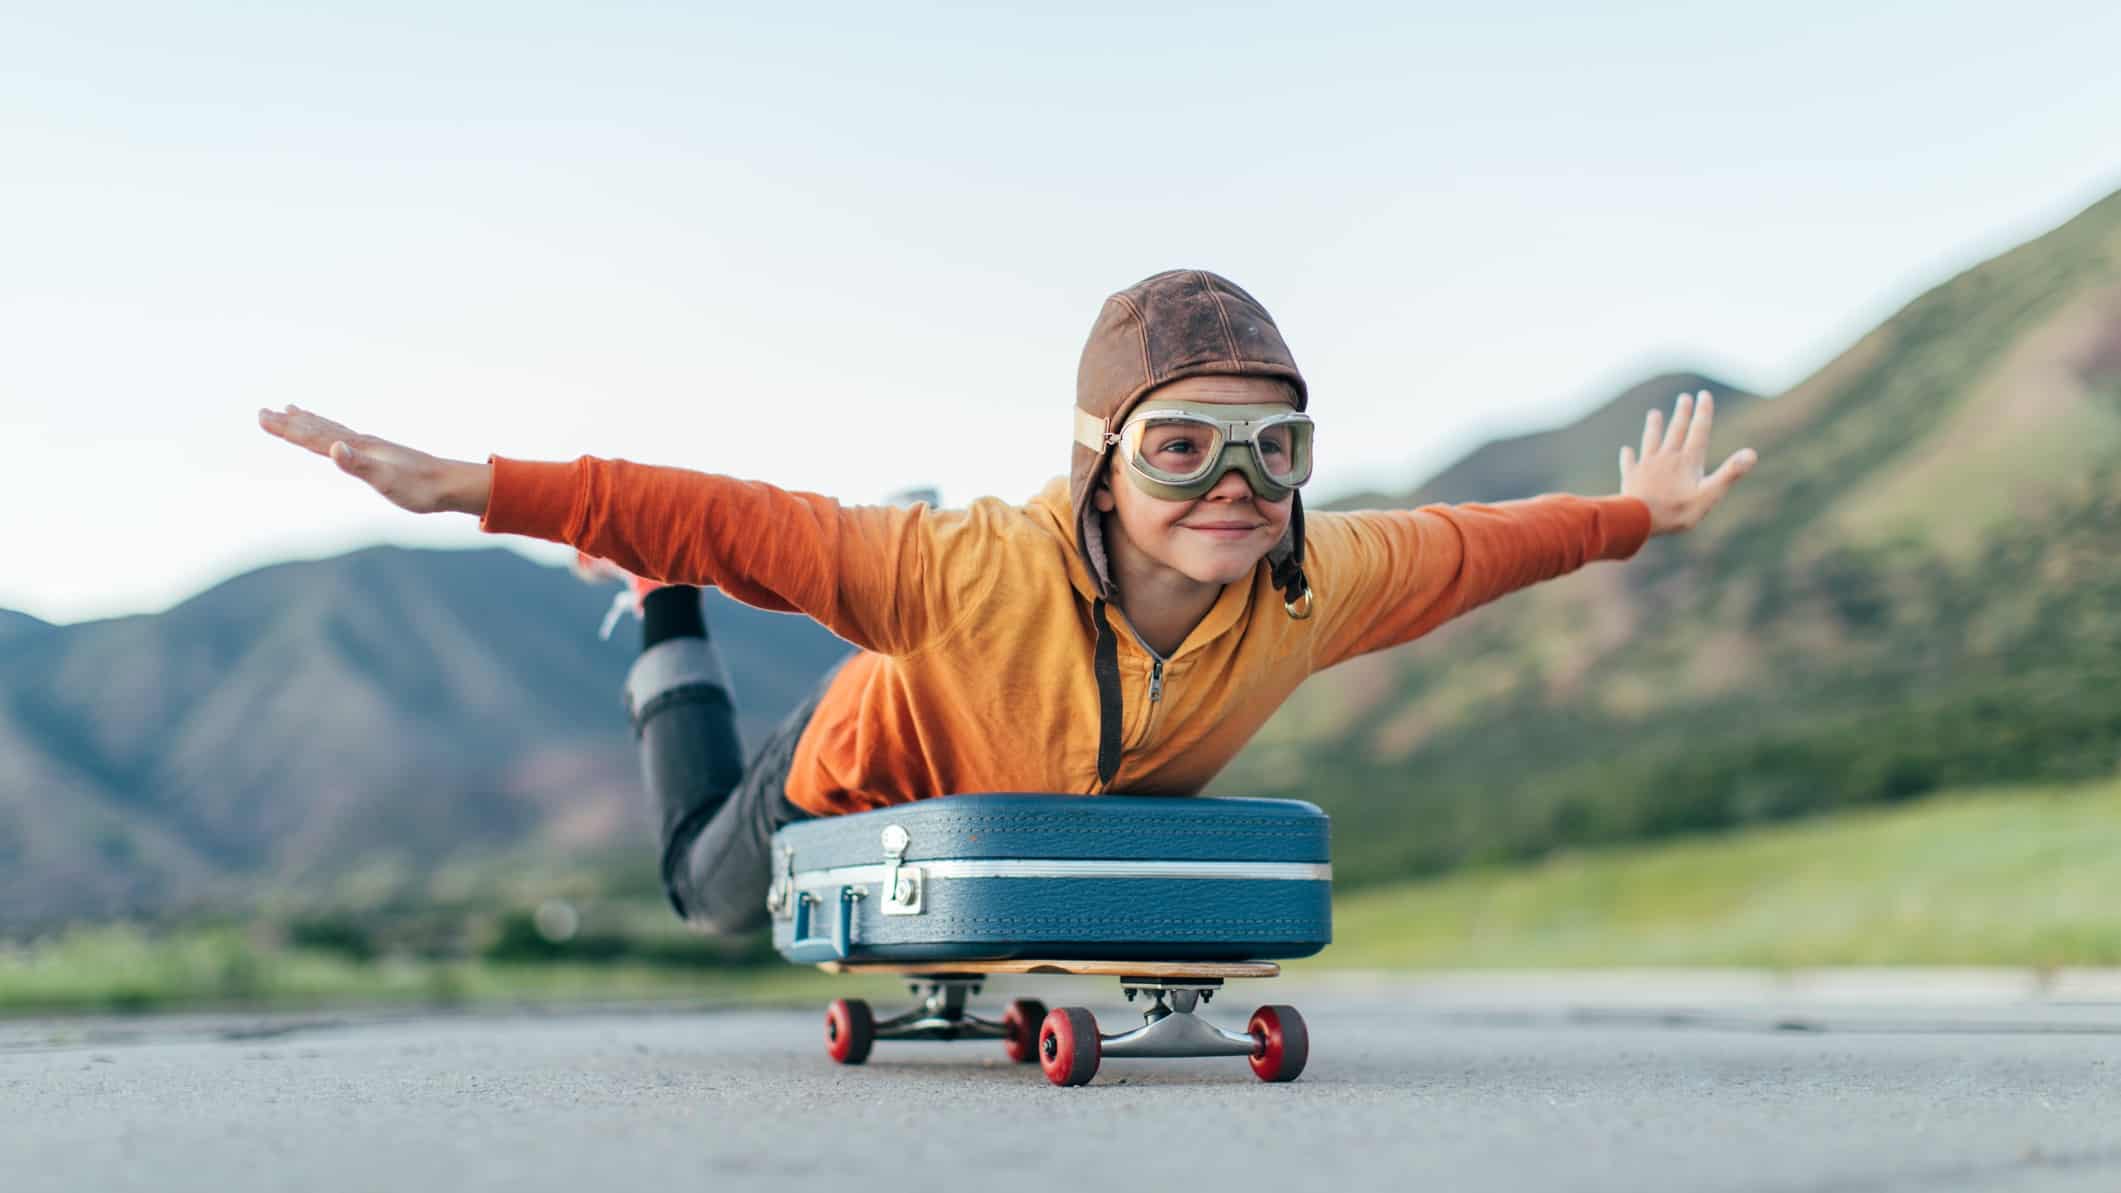 Kid with arm spread out on a luggage bag, riding a skateboard.